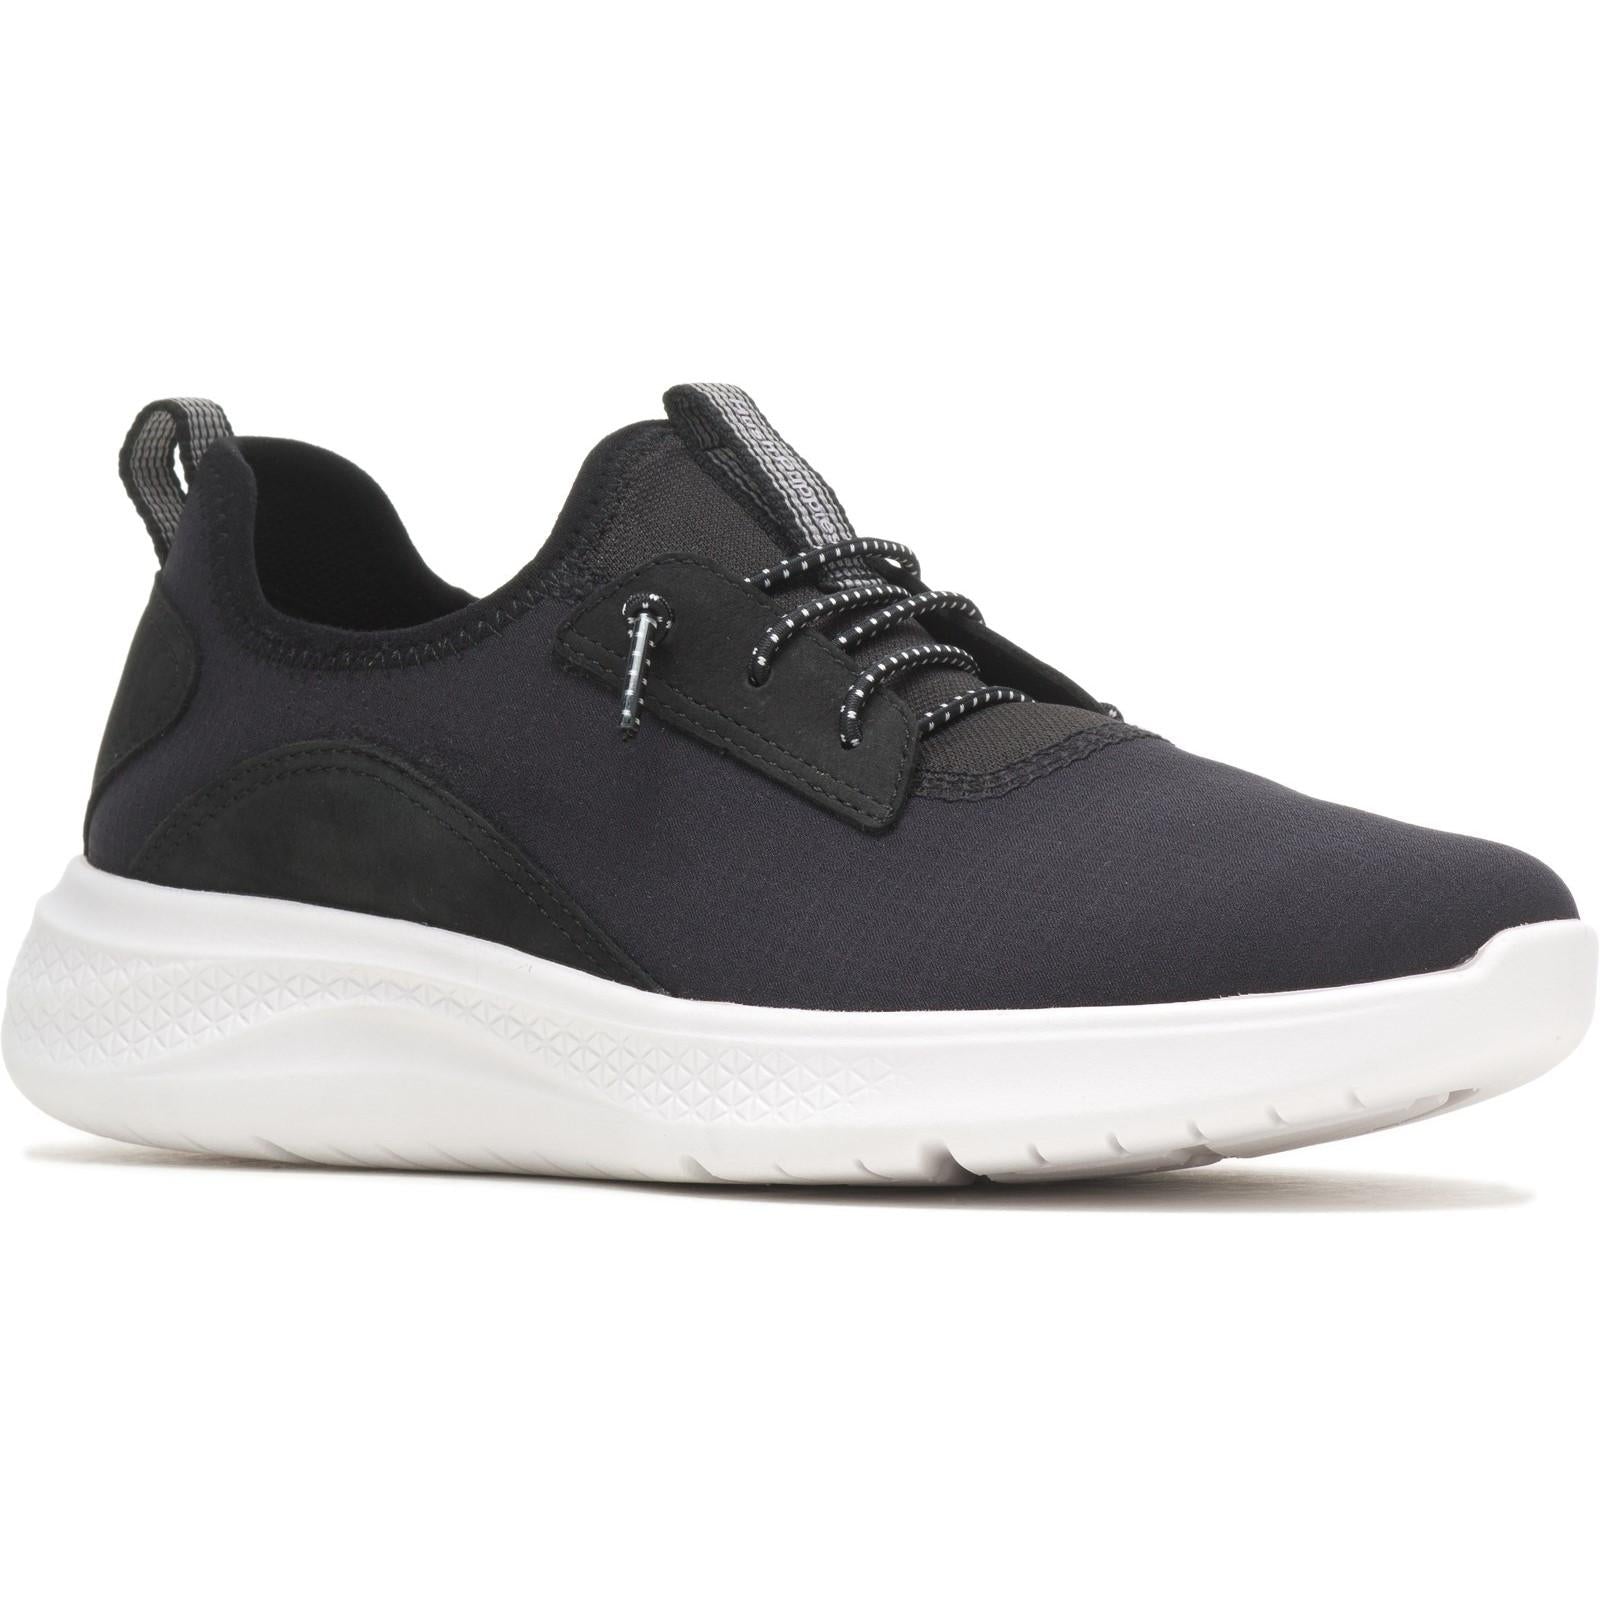 Hush Puppies Elevate Bungee Trainers